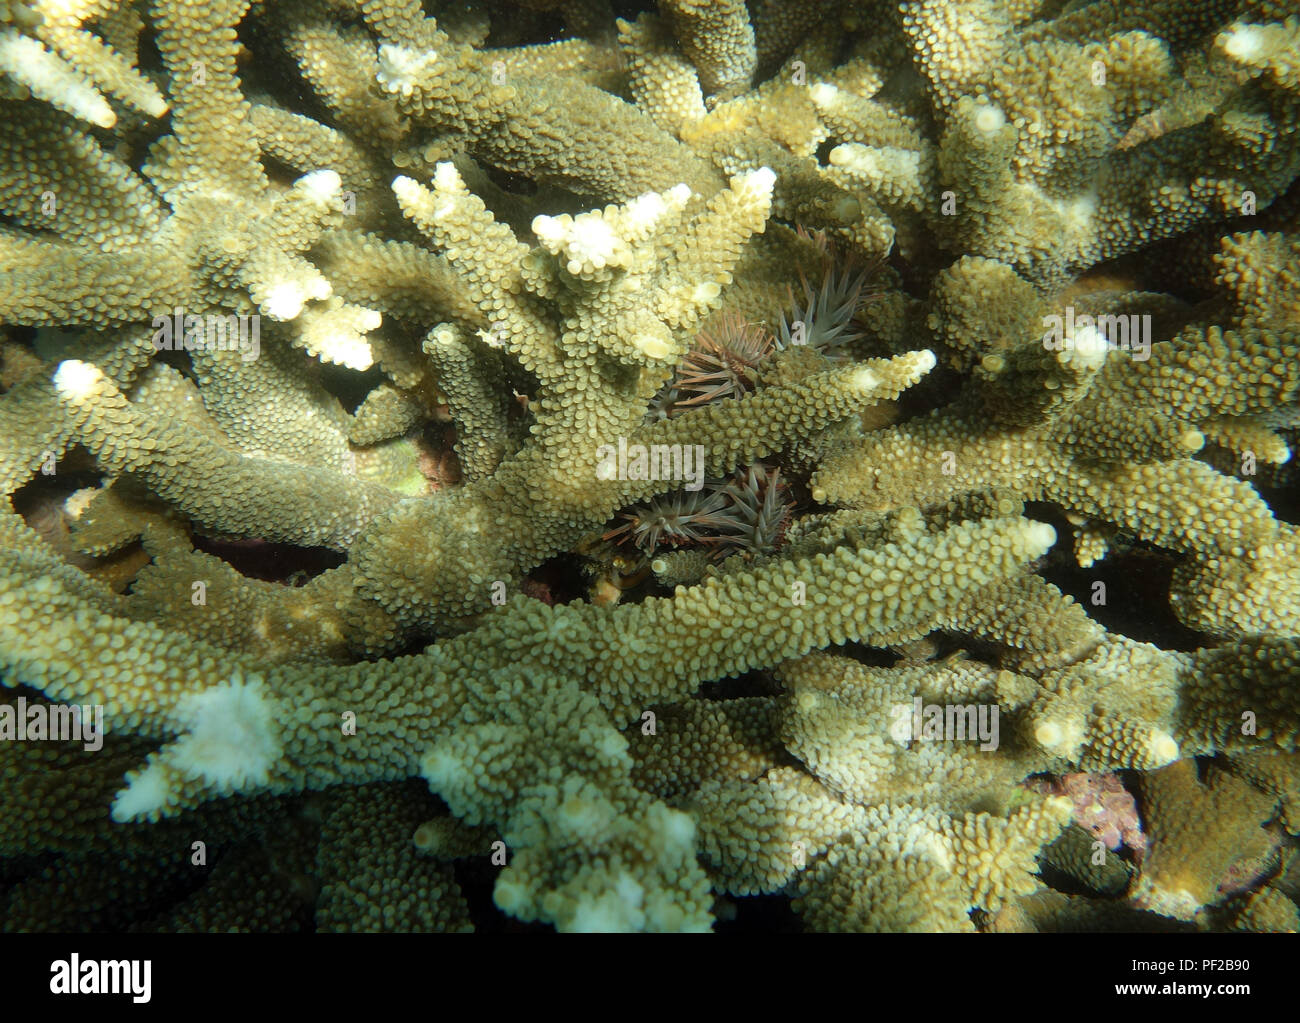 Crown of thorns starfish (Acanthaster spp.) hiding amongst its favoured prey, staghorn Acropora coral. Great Barrier Reef, Queensland, Australia Stock Photo